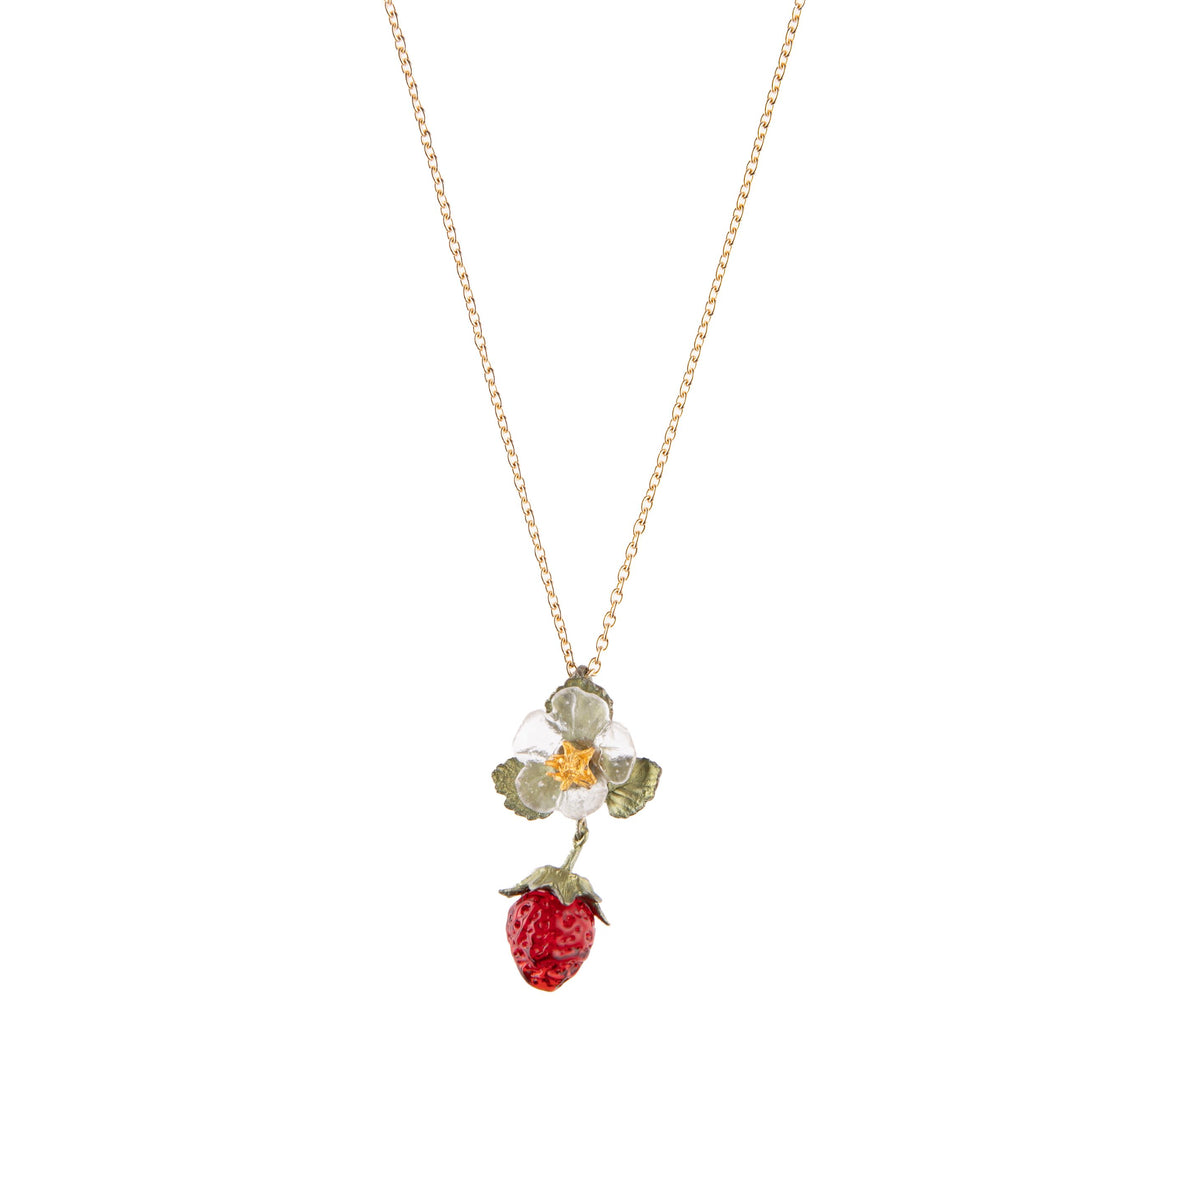 STRAWBERRY FLOWER PENDANT NECKLACE – The Huntington Store